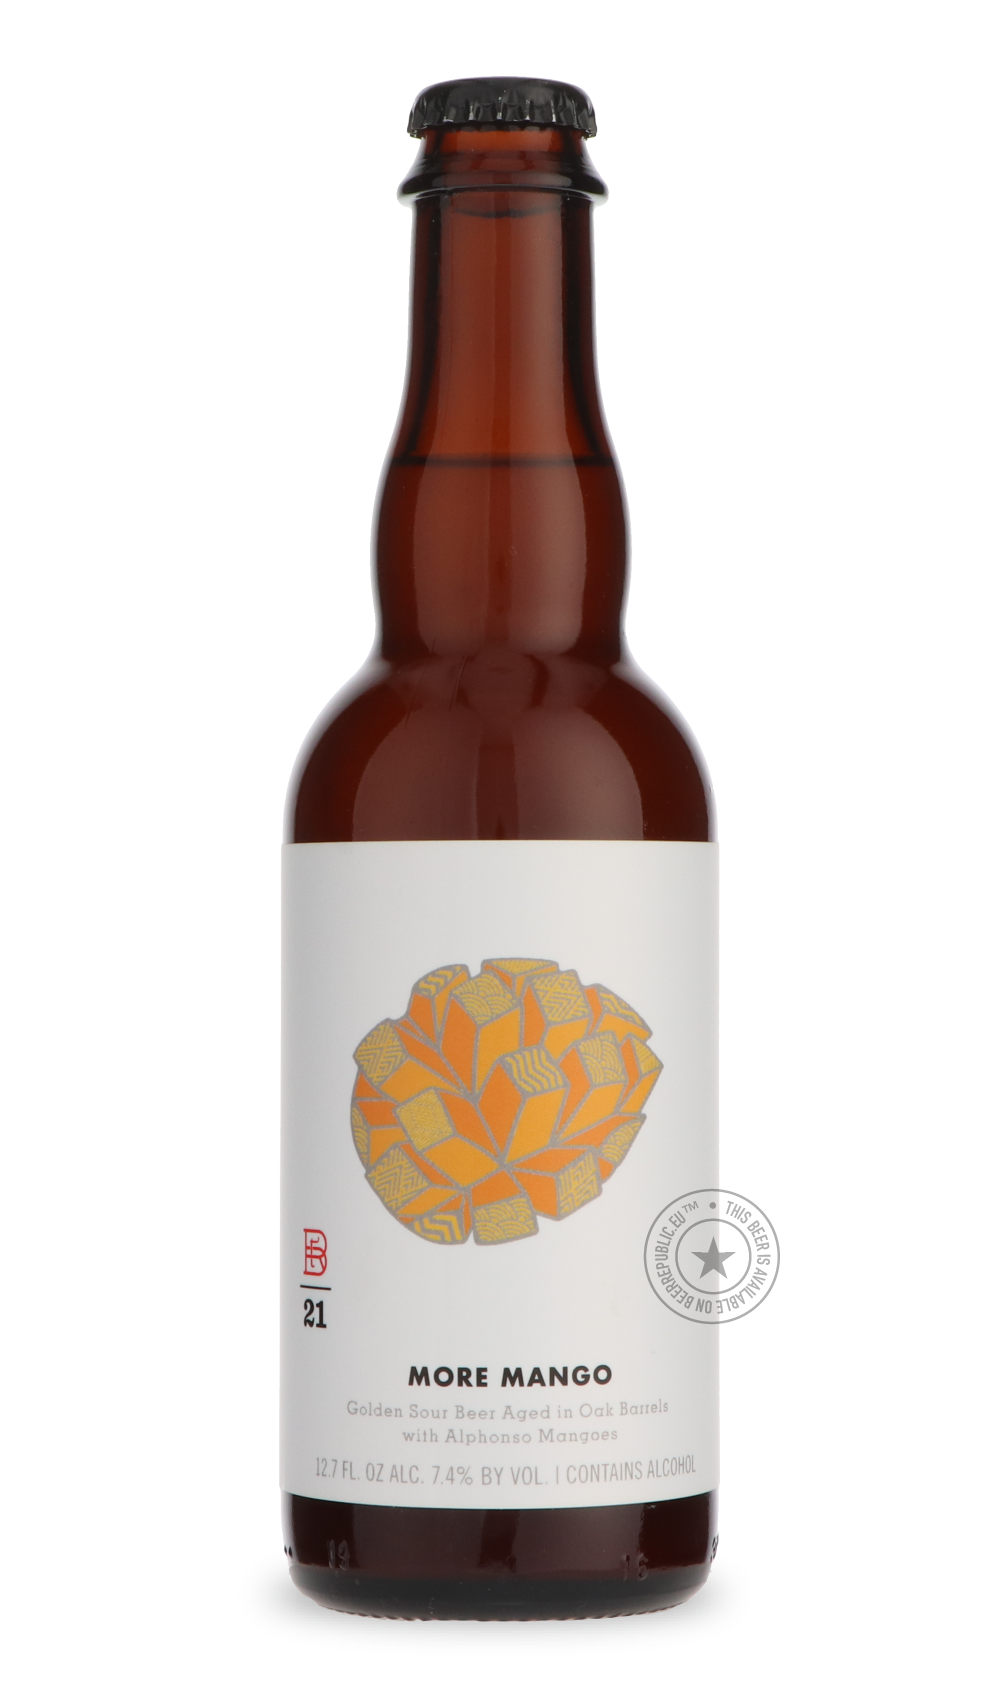 -The Rare Barrel- More Mango 2021-Sour / Wild & Fruity- Only @ Beer Republic - The best online beer store for American & Canadian craft beer - Buy beer online from the USA and Canada - Bier online kopen - Amerikaans bier kopen - Craft beer store - Craft beer kopen - Amerikanisch bier kaufen - Bier online kaufen - Acheter biere online - IPA - Stout - Porter - New England IPA - Hazy IPA - Imperial Stout - Barrel Aged - Barrel Aged Imperial Stout - Brown - Dark beer - Blond - Blonde - Pilsner - Lager - Wheat -